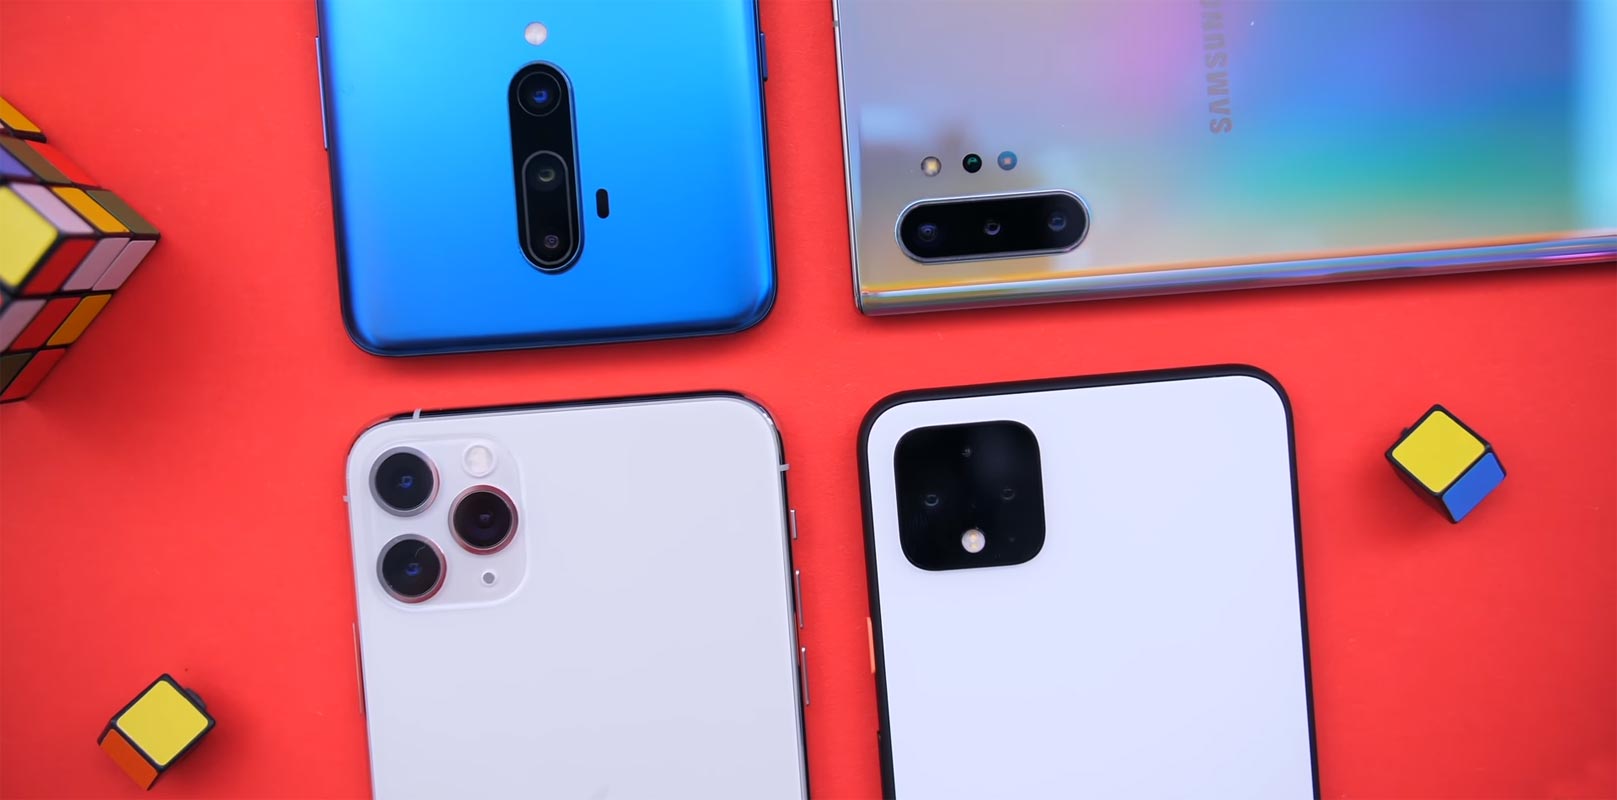 iPhone 11 Pro, Note 10, Pixel 4 and OnePlus 7 Side By Side